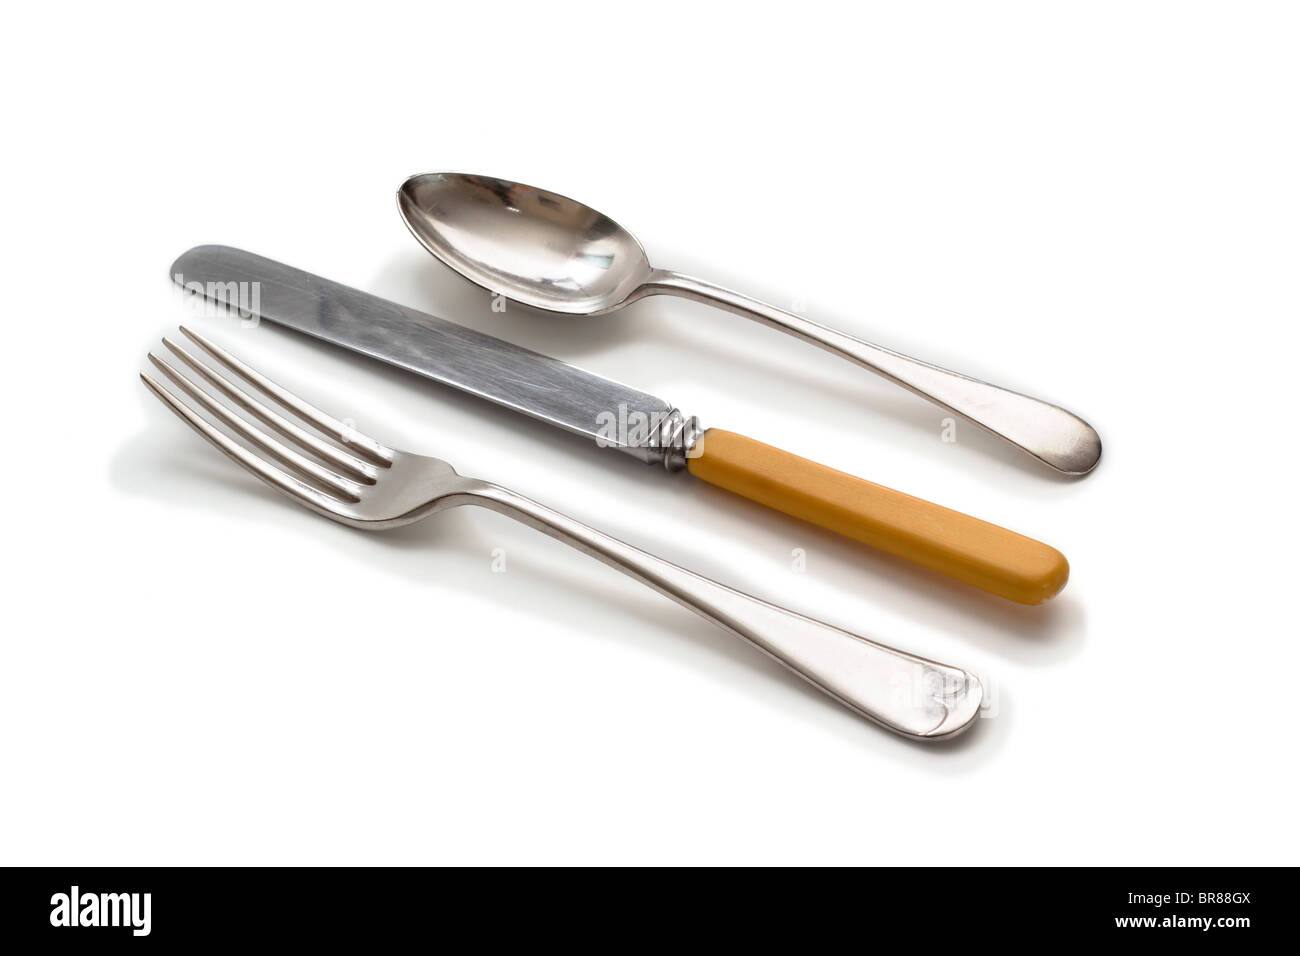 Knife, fork, and spoon.  Old fashioned silver plate with ivory handled knife, Stock Photo